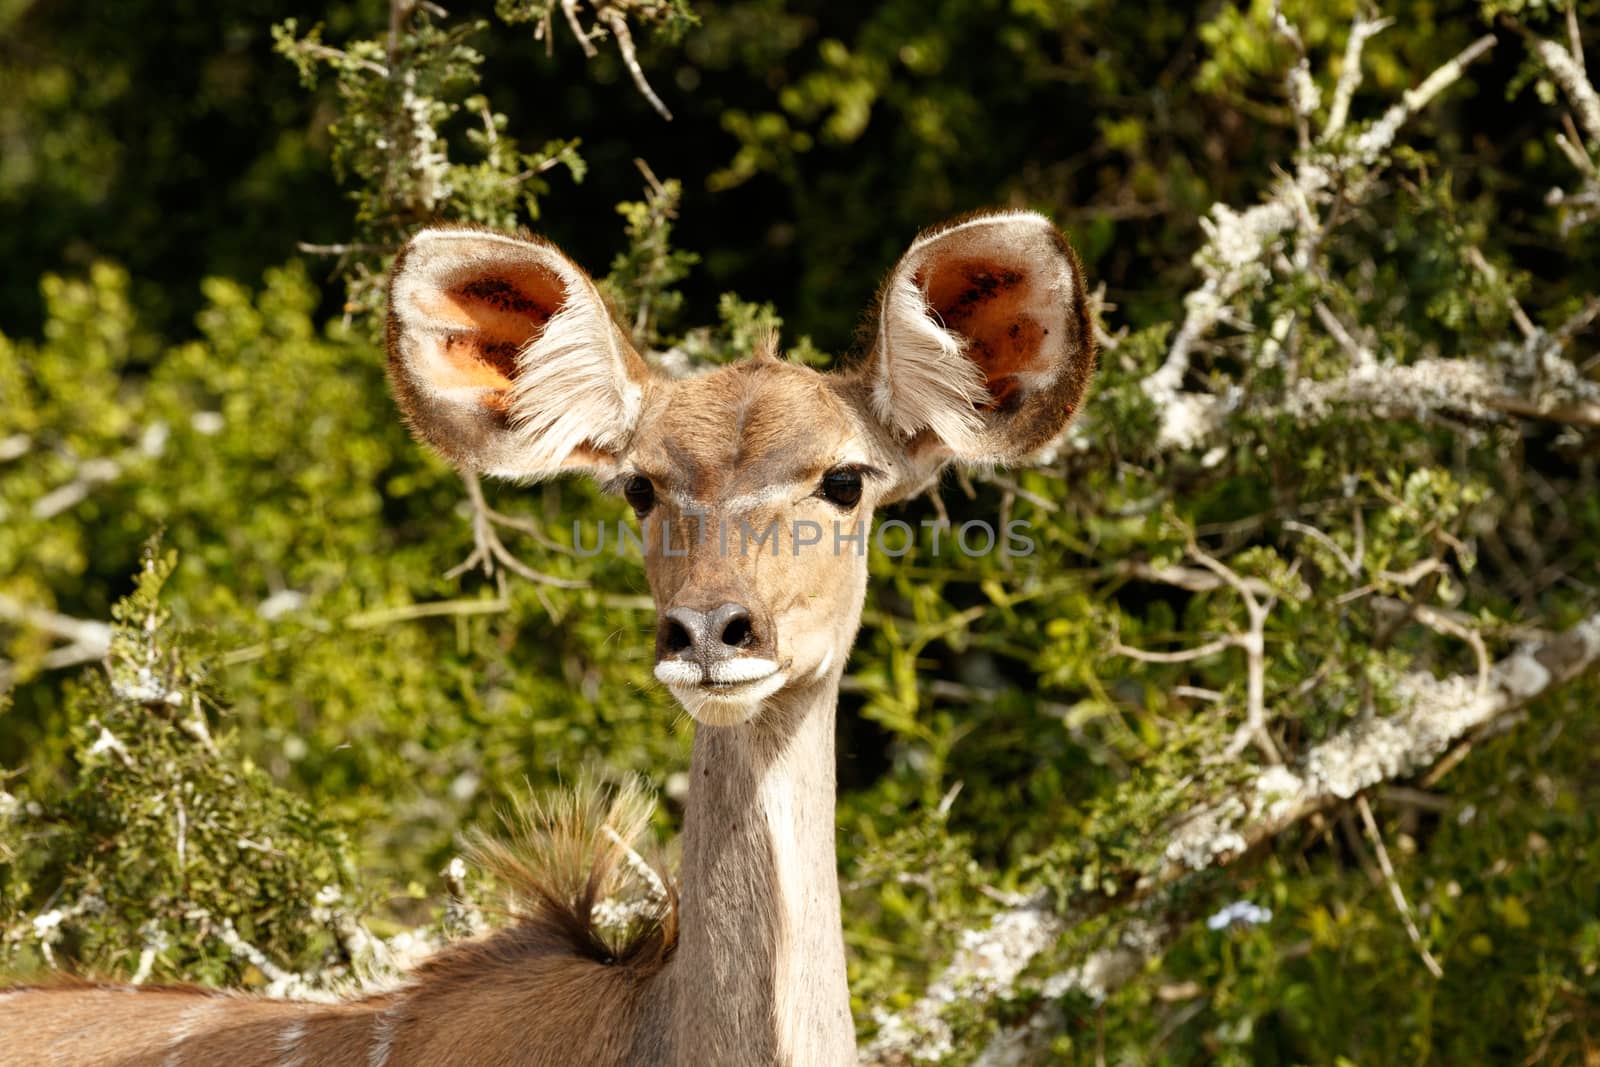 Hair up straight on the Greater Female Kudu with sharp ears and green background